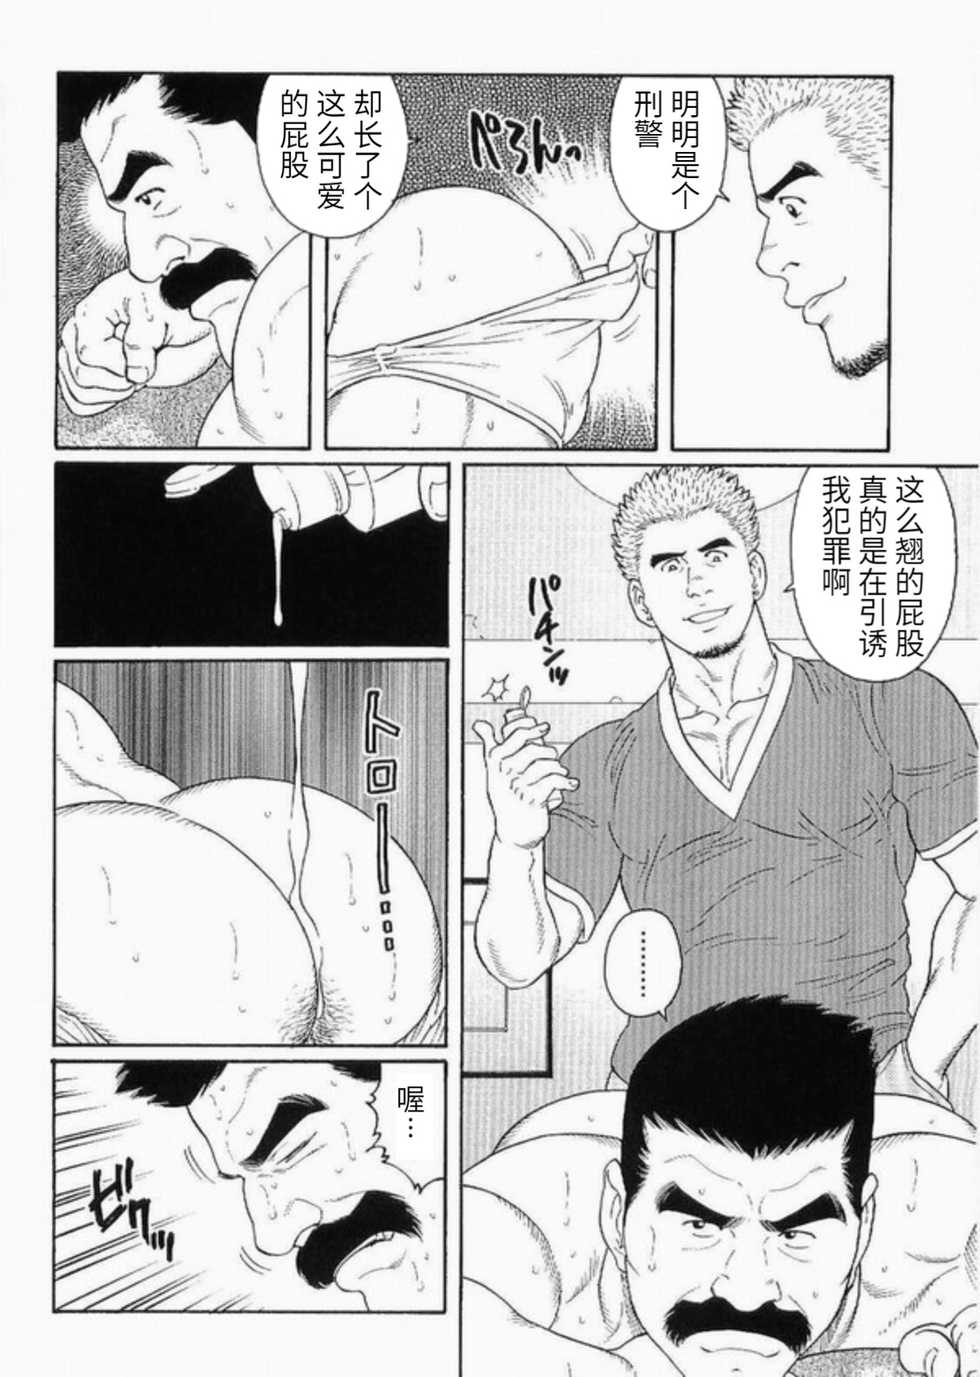 [Tagame Gengoroh] Hairy Oracle | 神之启示 (Arena) [Chinese] - Page 6